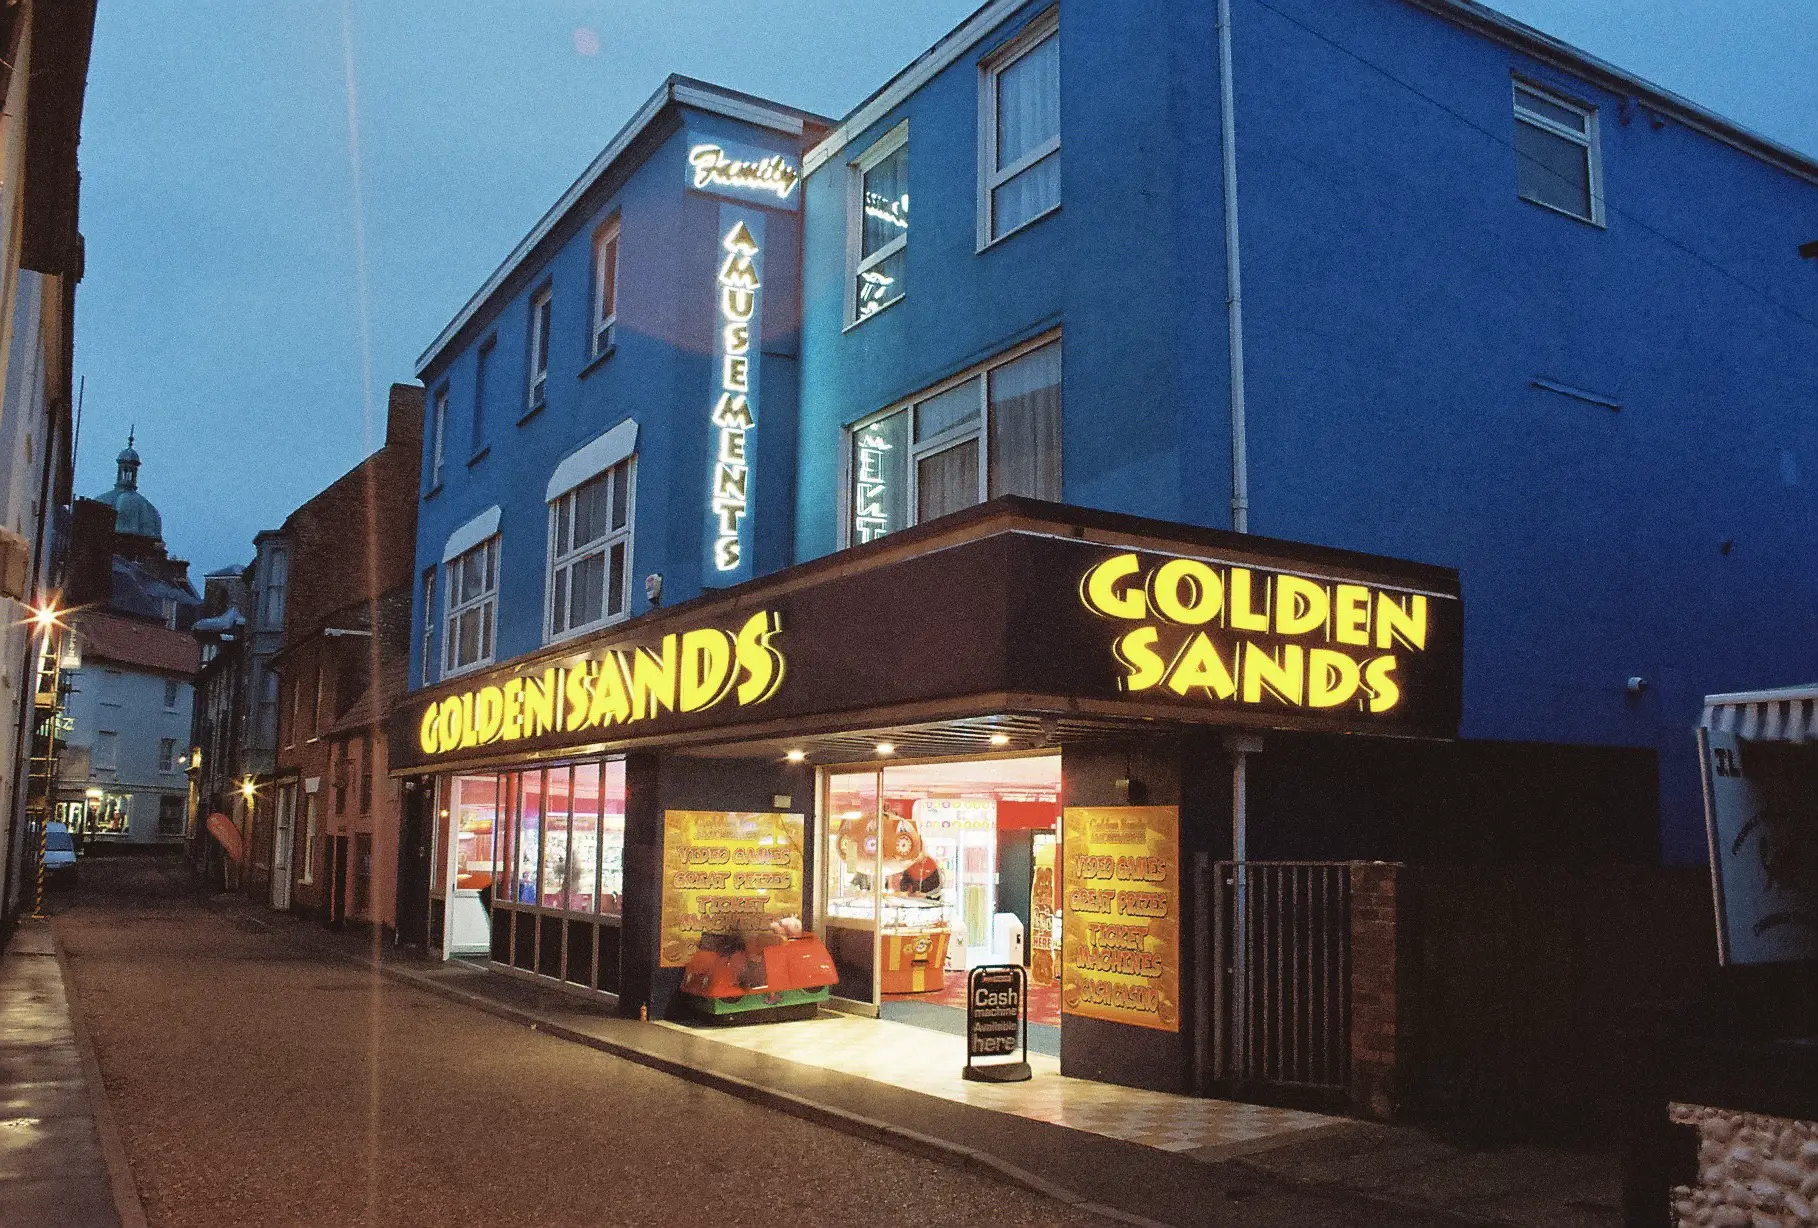 Illuminated yellow sign in the words Golden Sands along the front and down the side of the overhanging arcade front.